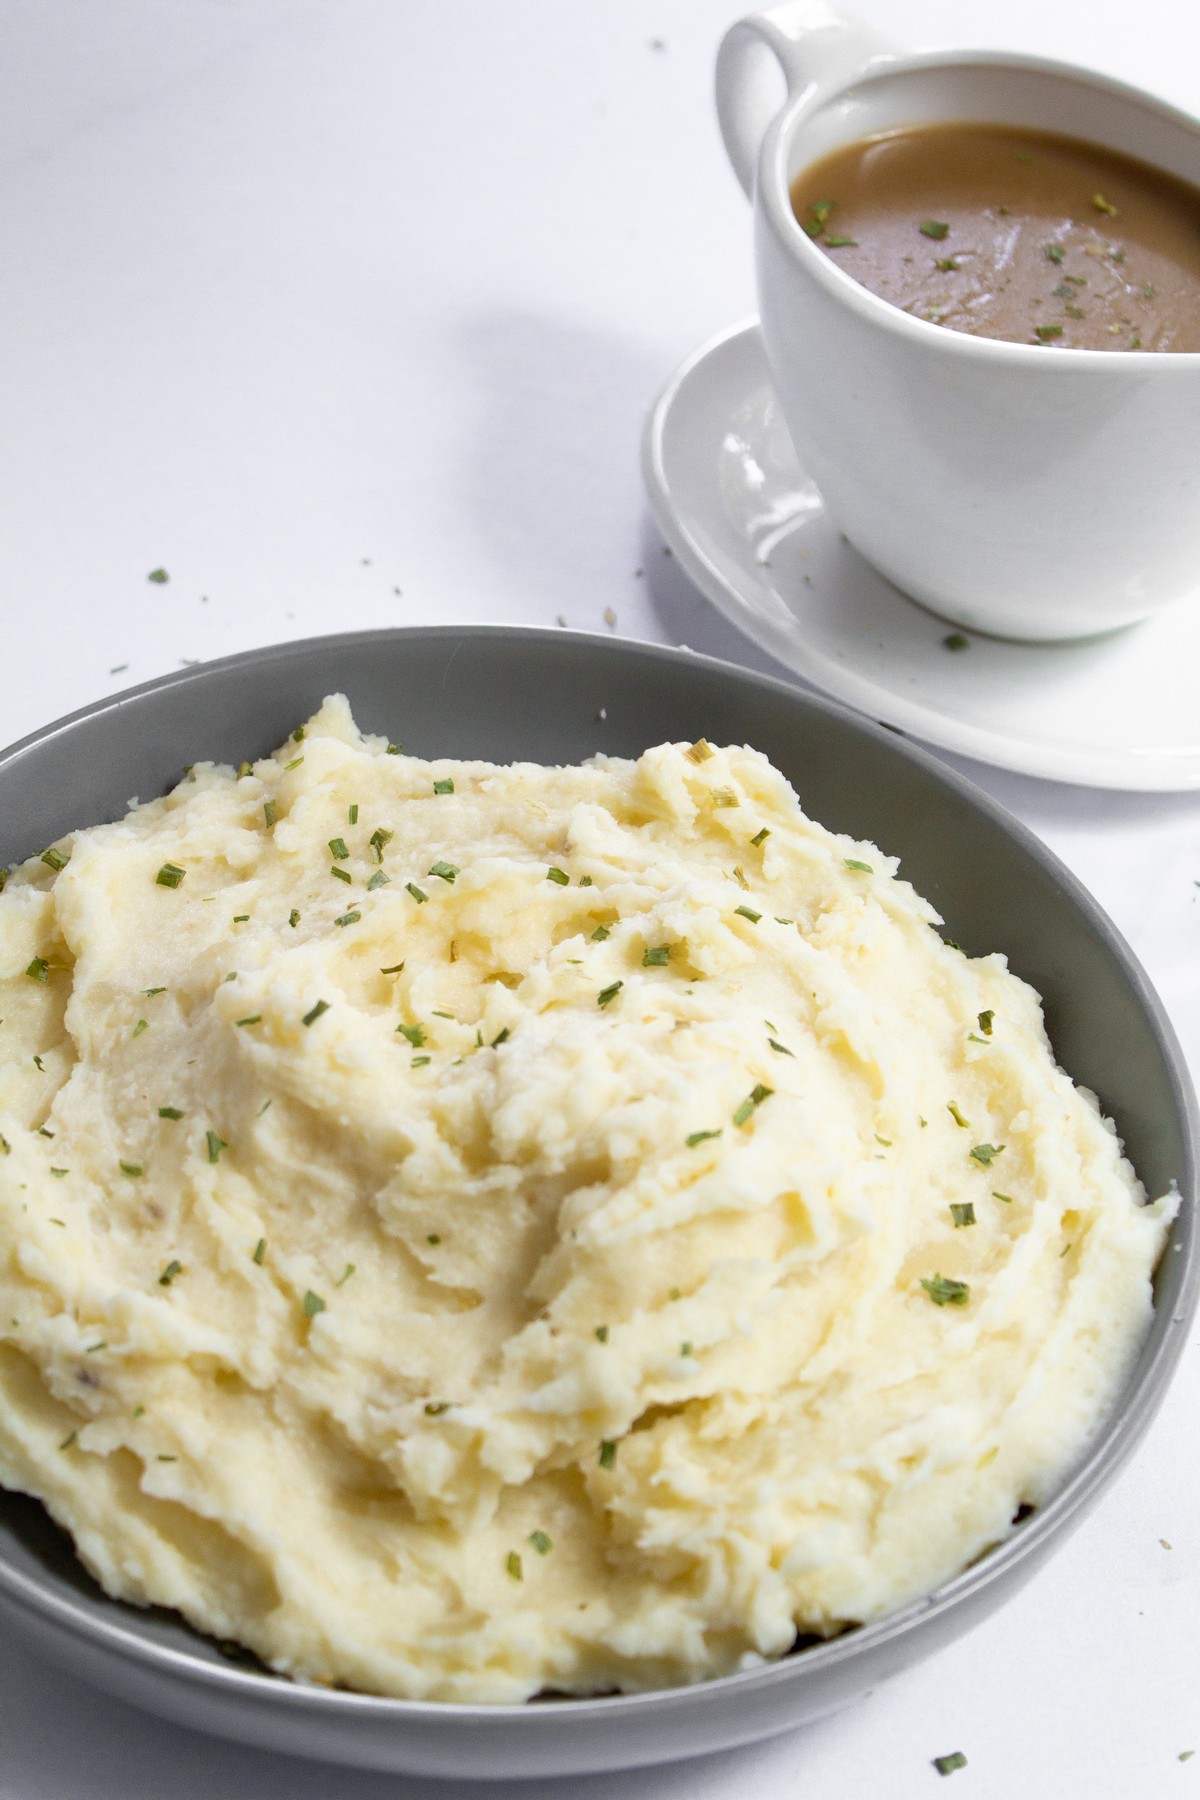 mashed potatoes garnished with chives and gravy in the background